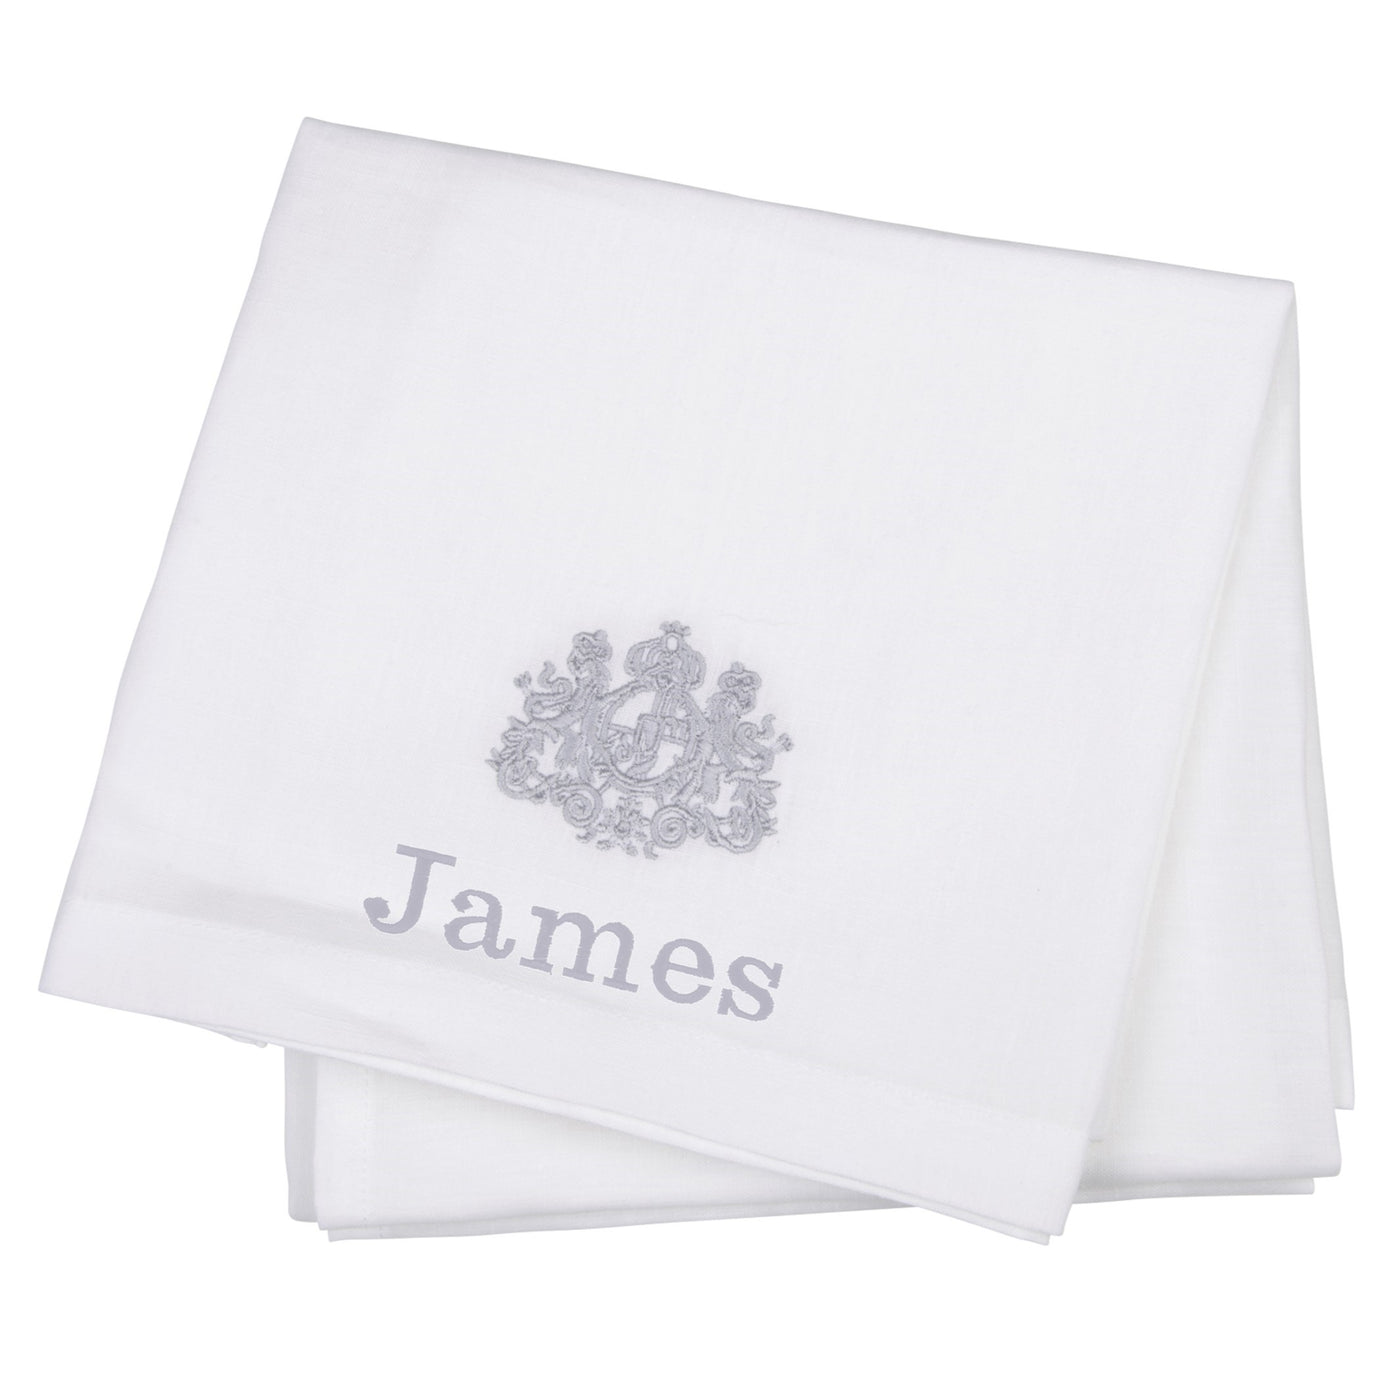 Crest Embroidered Pure Linen Hand Towel